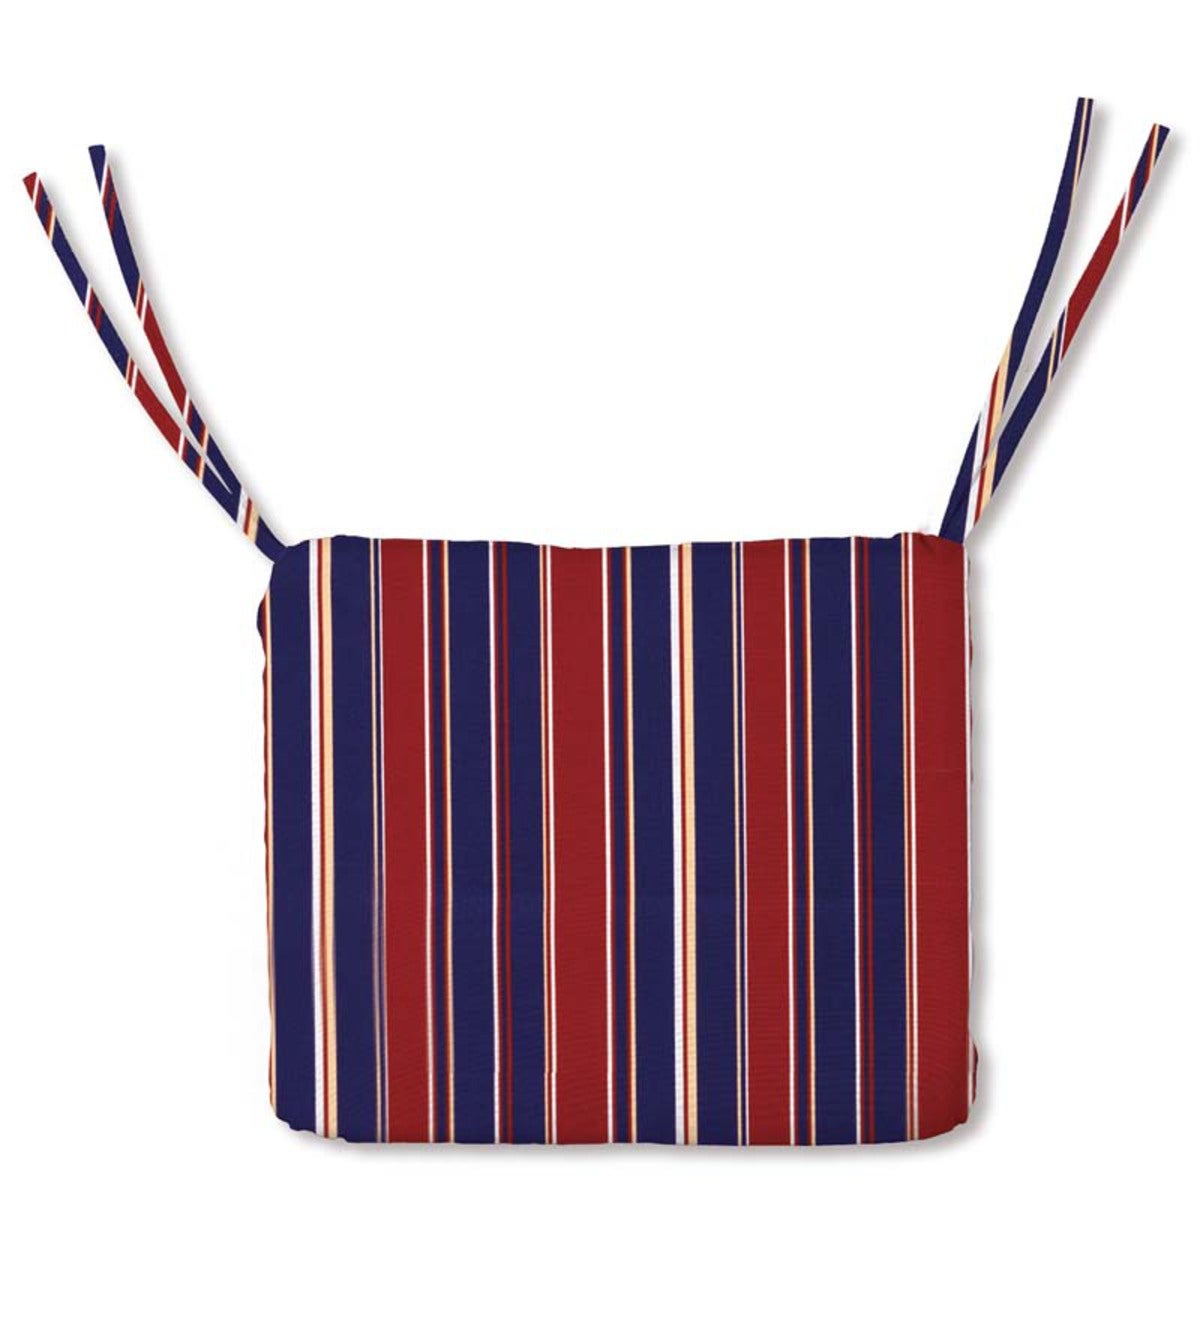 Sale! Polyester Classic Chair Cushions With Ties, 17¾”x 15¼”x 3” - Patriot Stripe